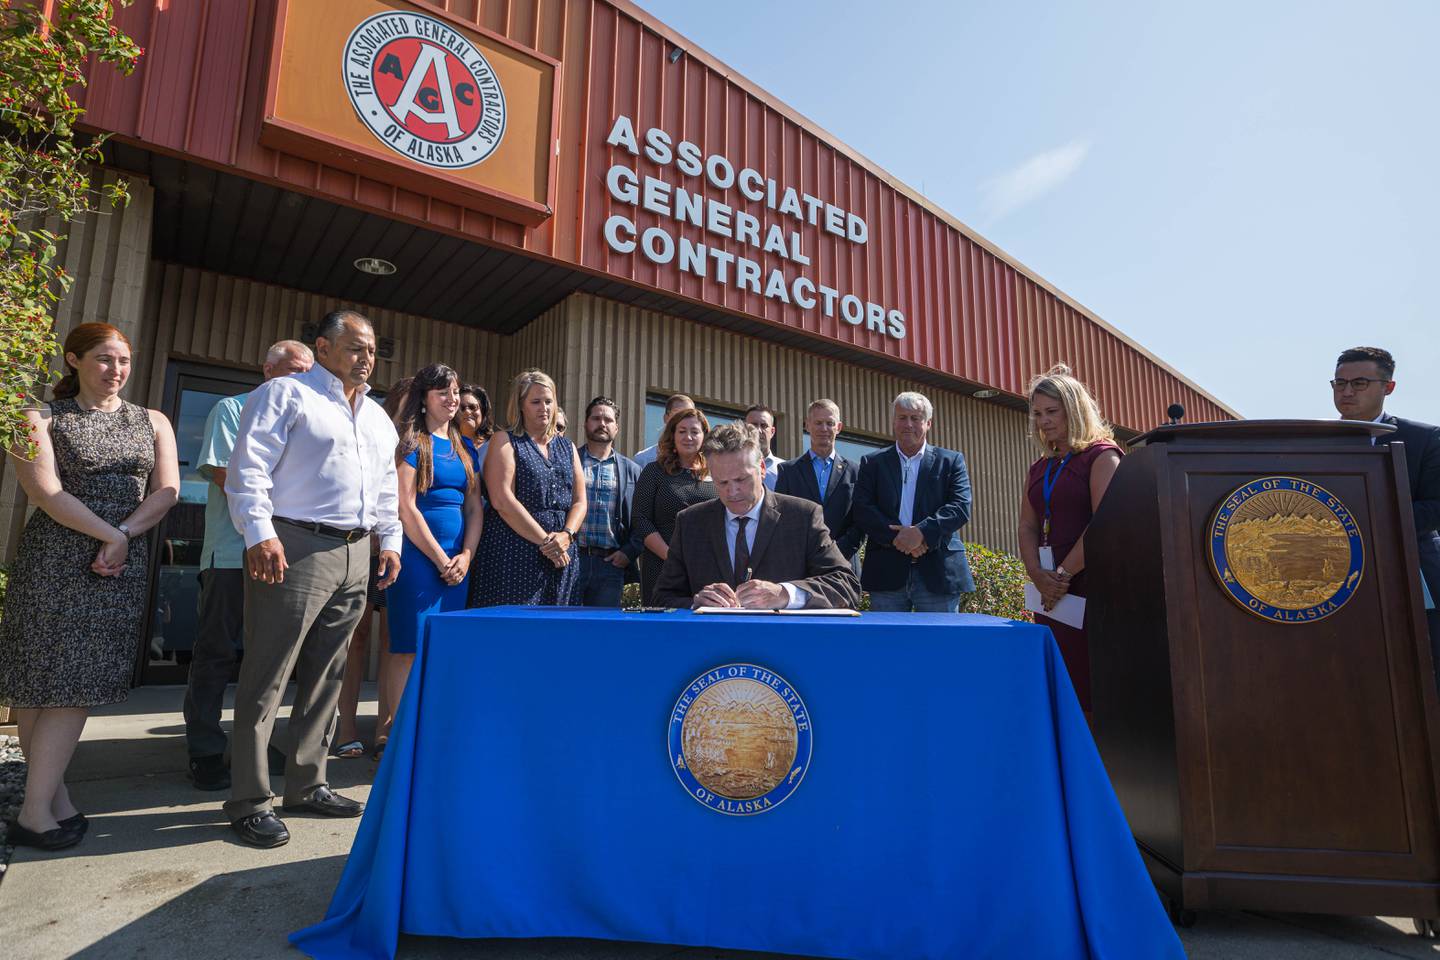 AGC, Associated General Contractors, Gov Dunleavy, Mike Dunleavy, bill signing, governor dunleavy